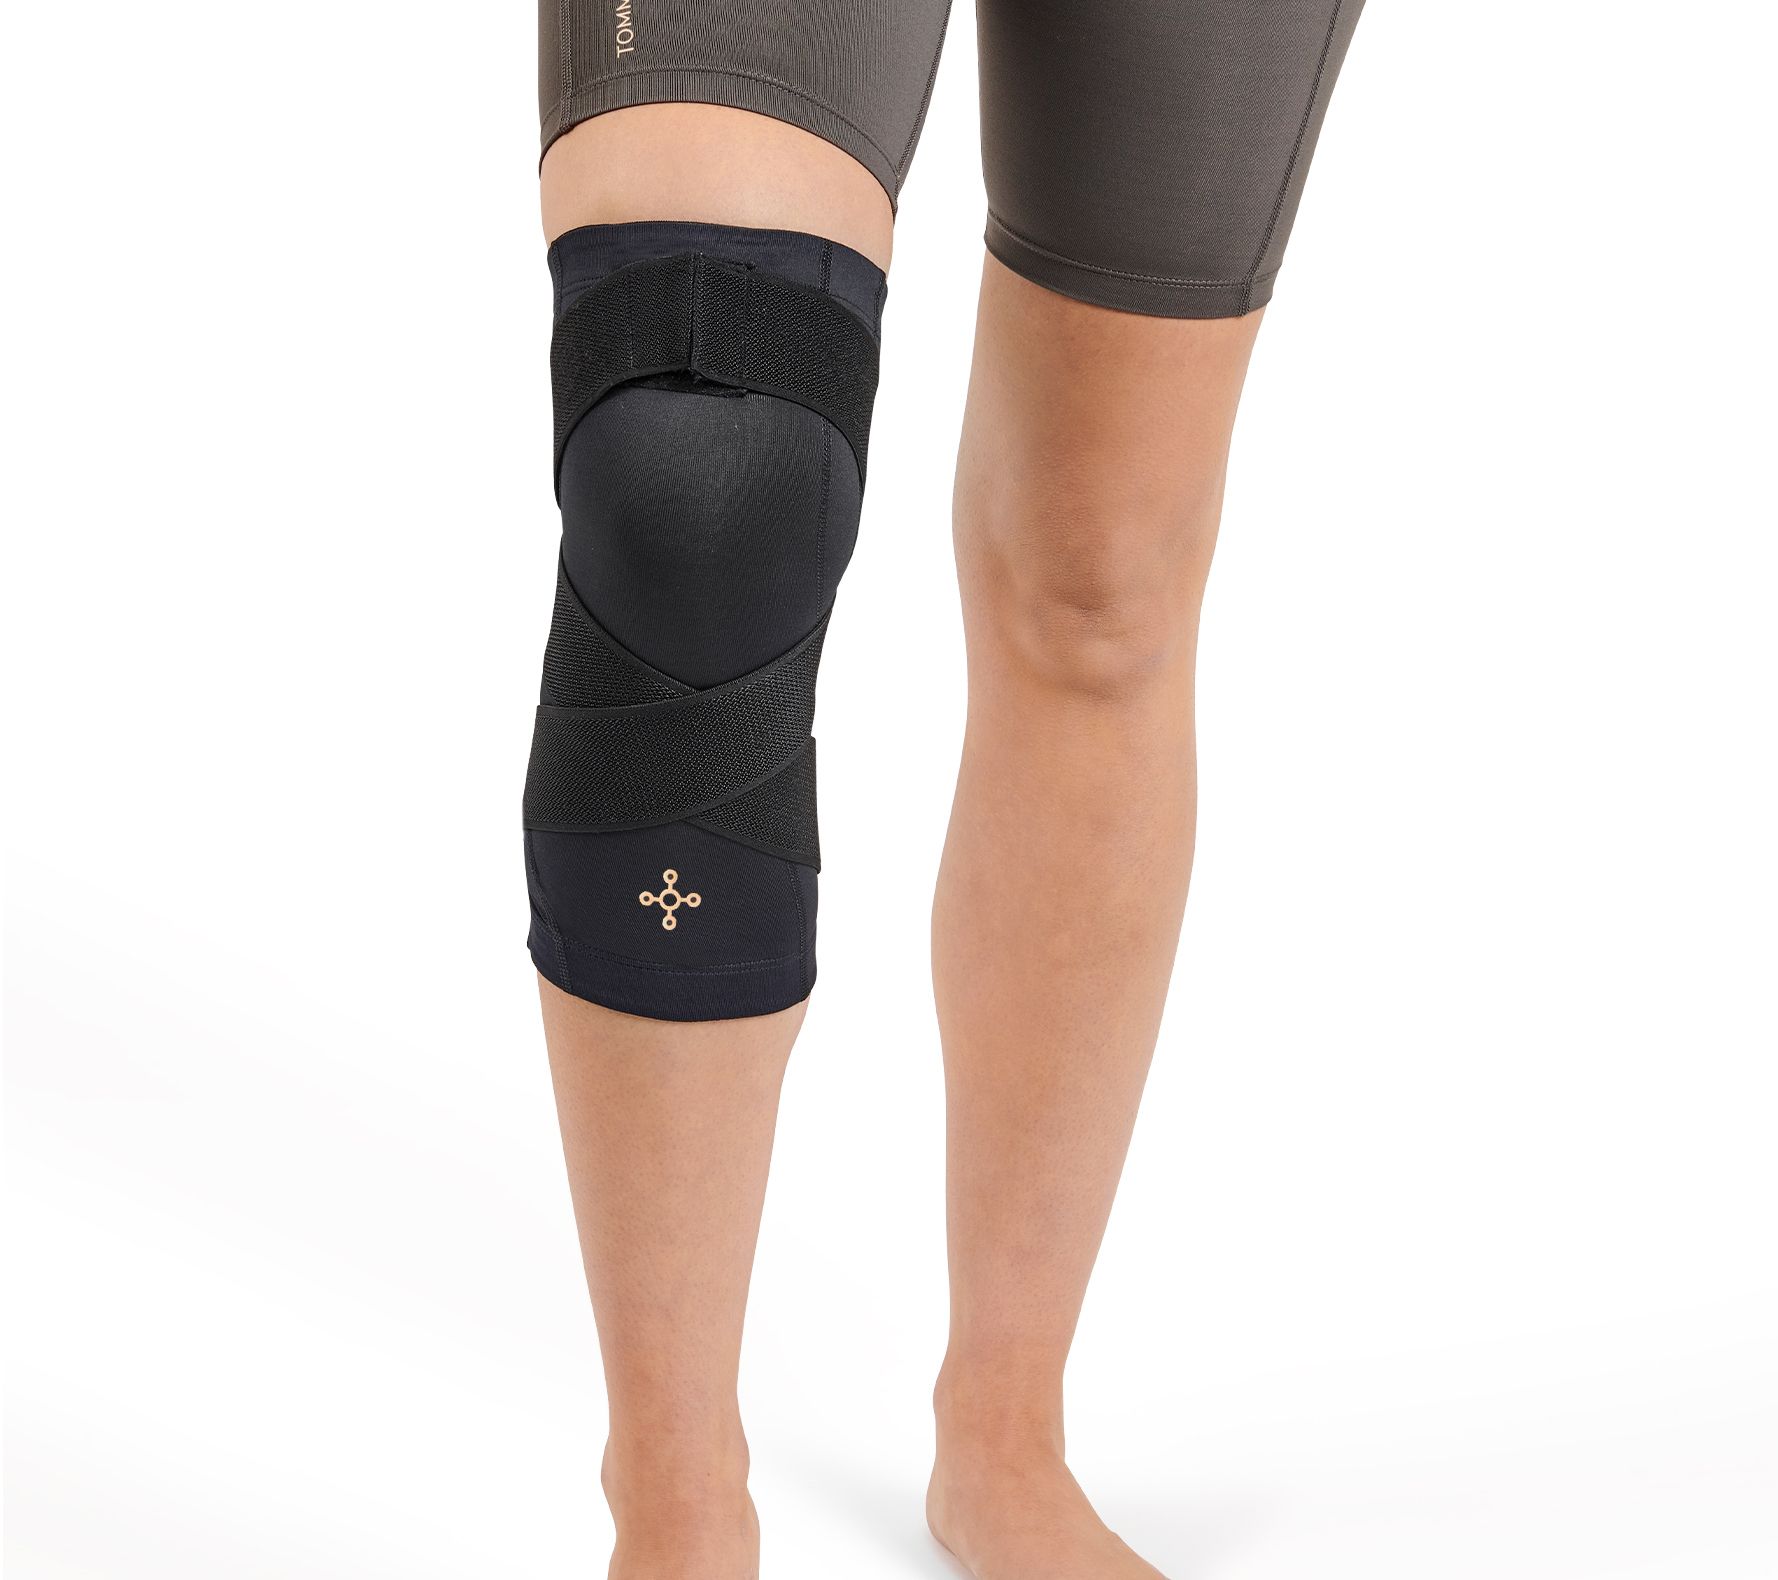 Copper Fit Pro Series Performance Compression Elbow Sleeve Medium Black  with Copper Trim